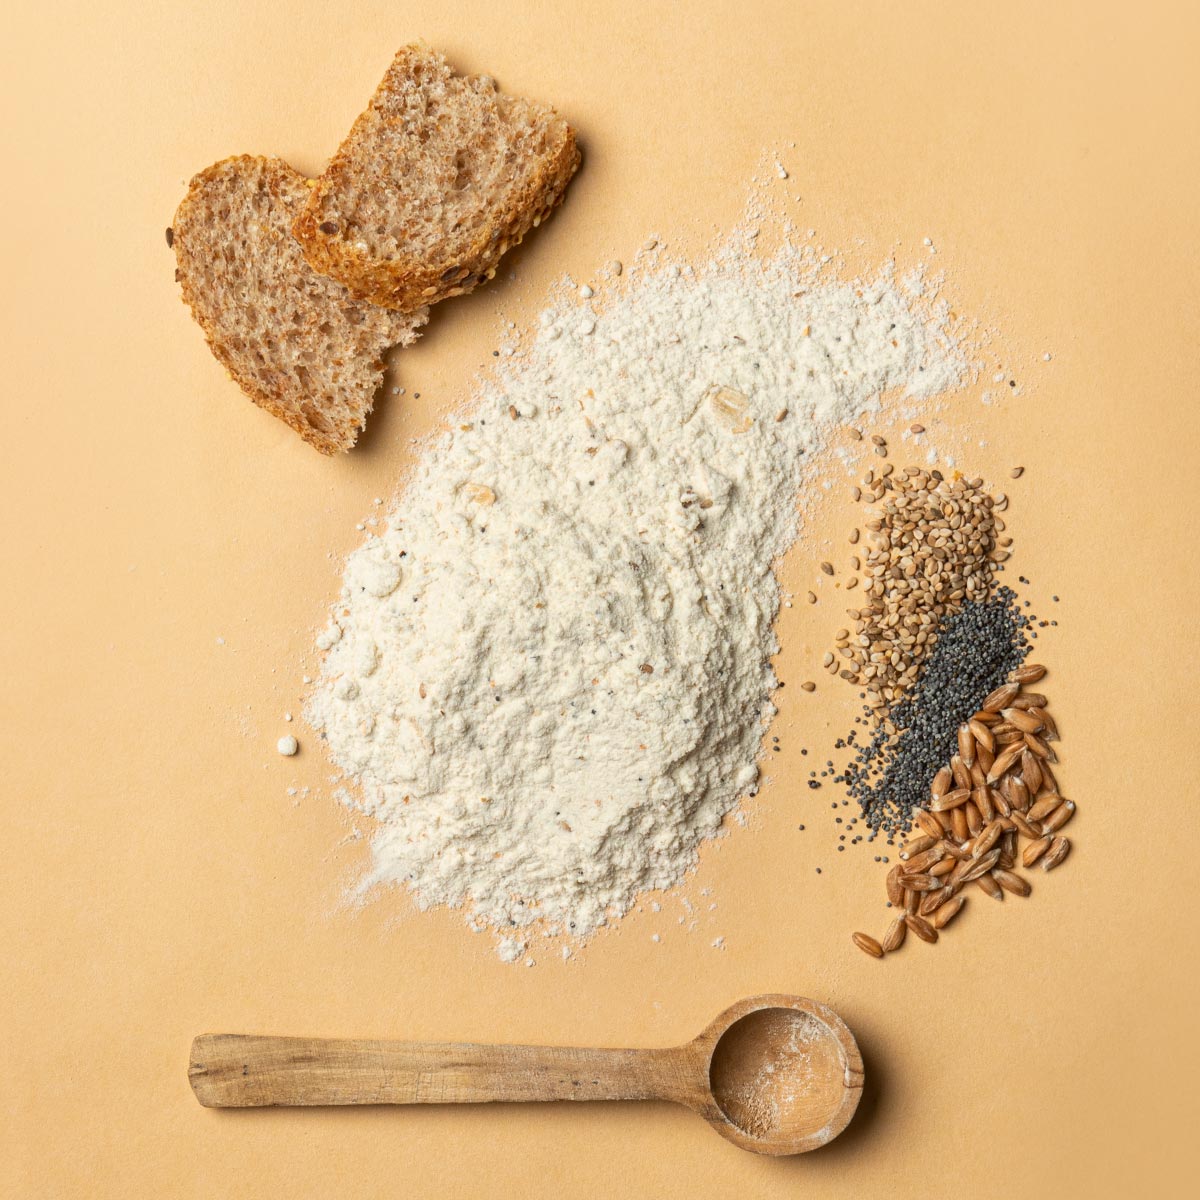 Flour + Cereals and Seeds